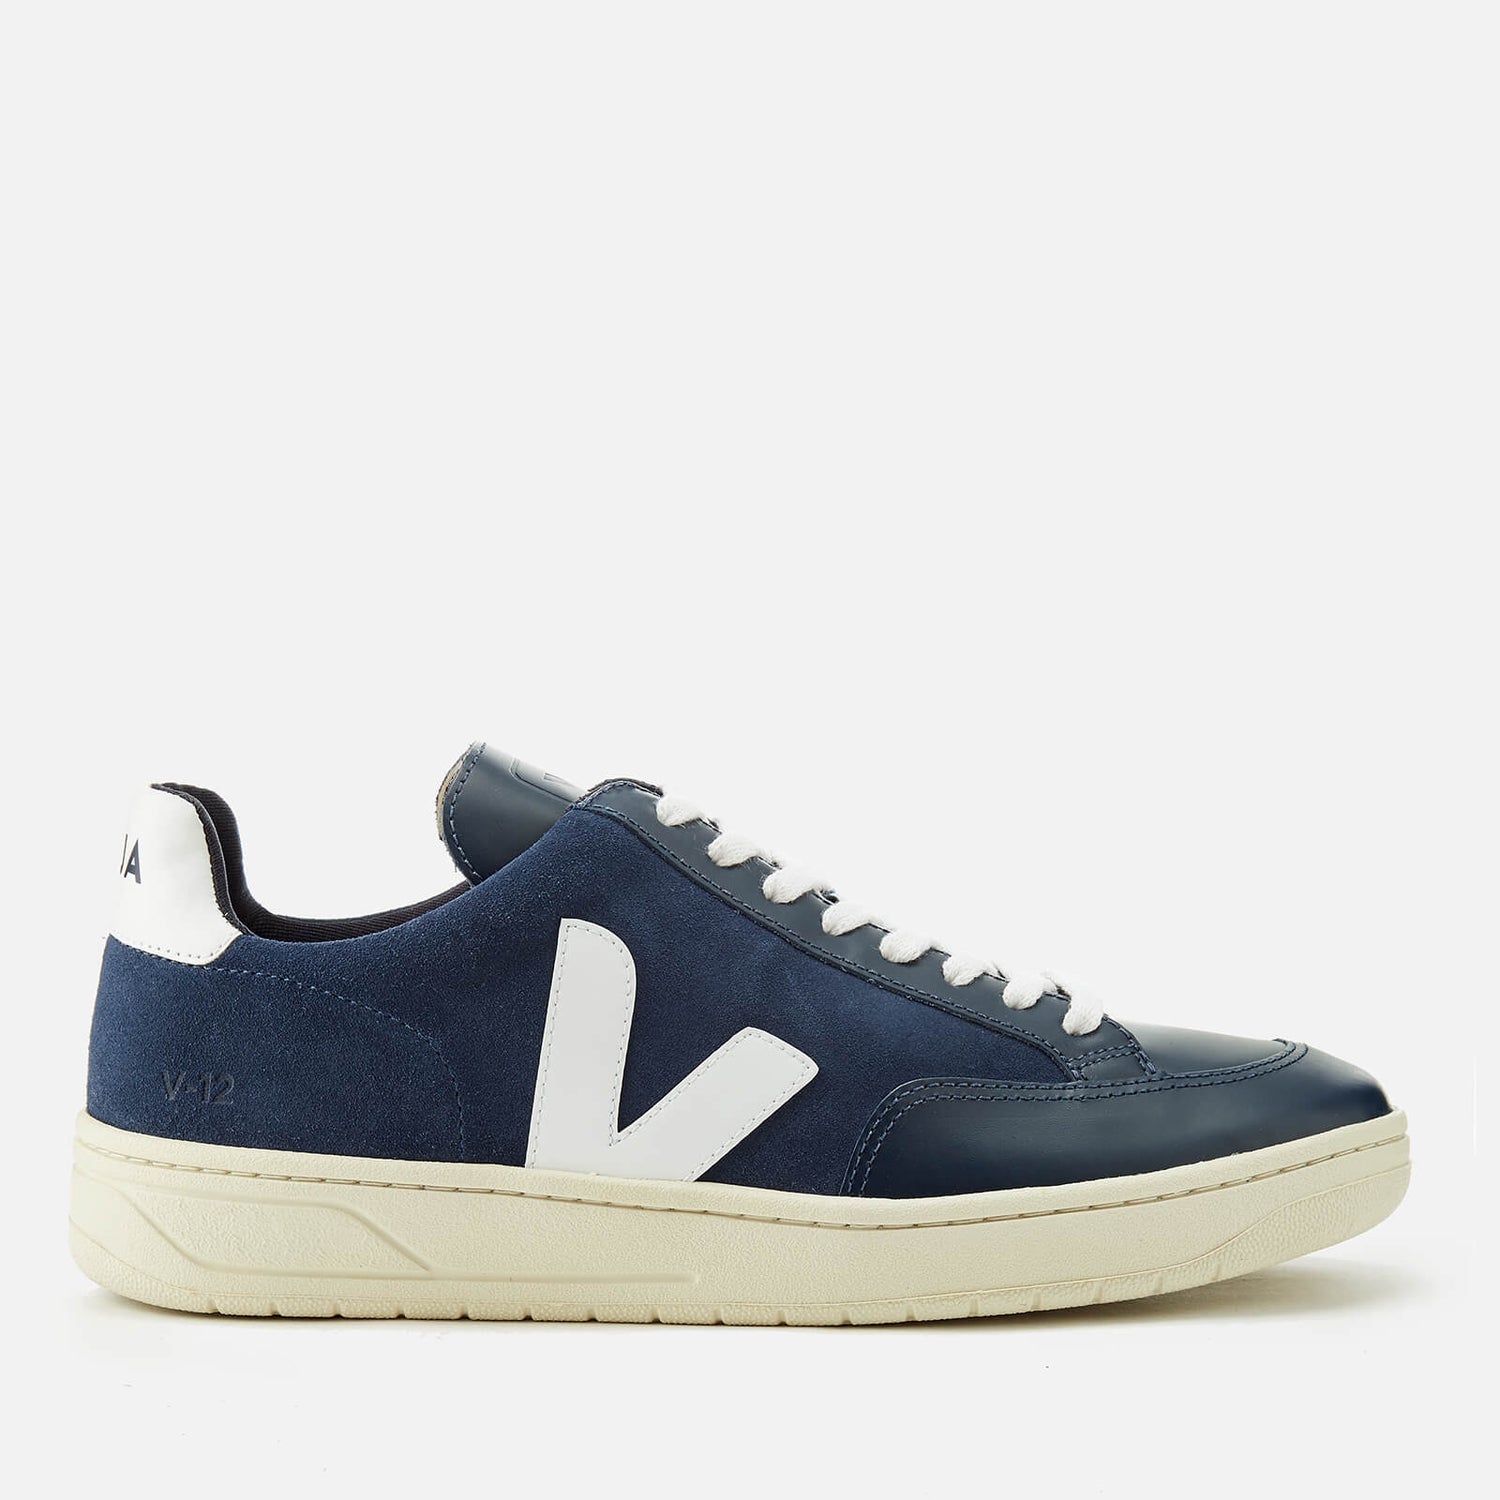 Veja Men's V-12 Suede Trainers - Midnight/White - Free UK Delivery ...